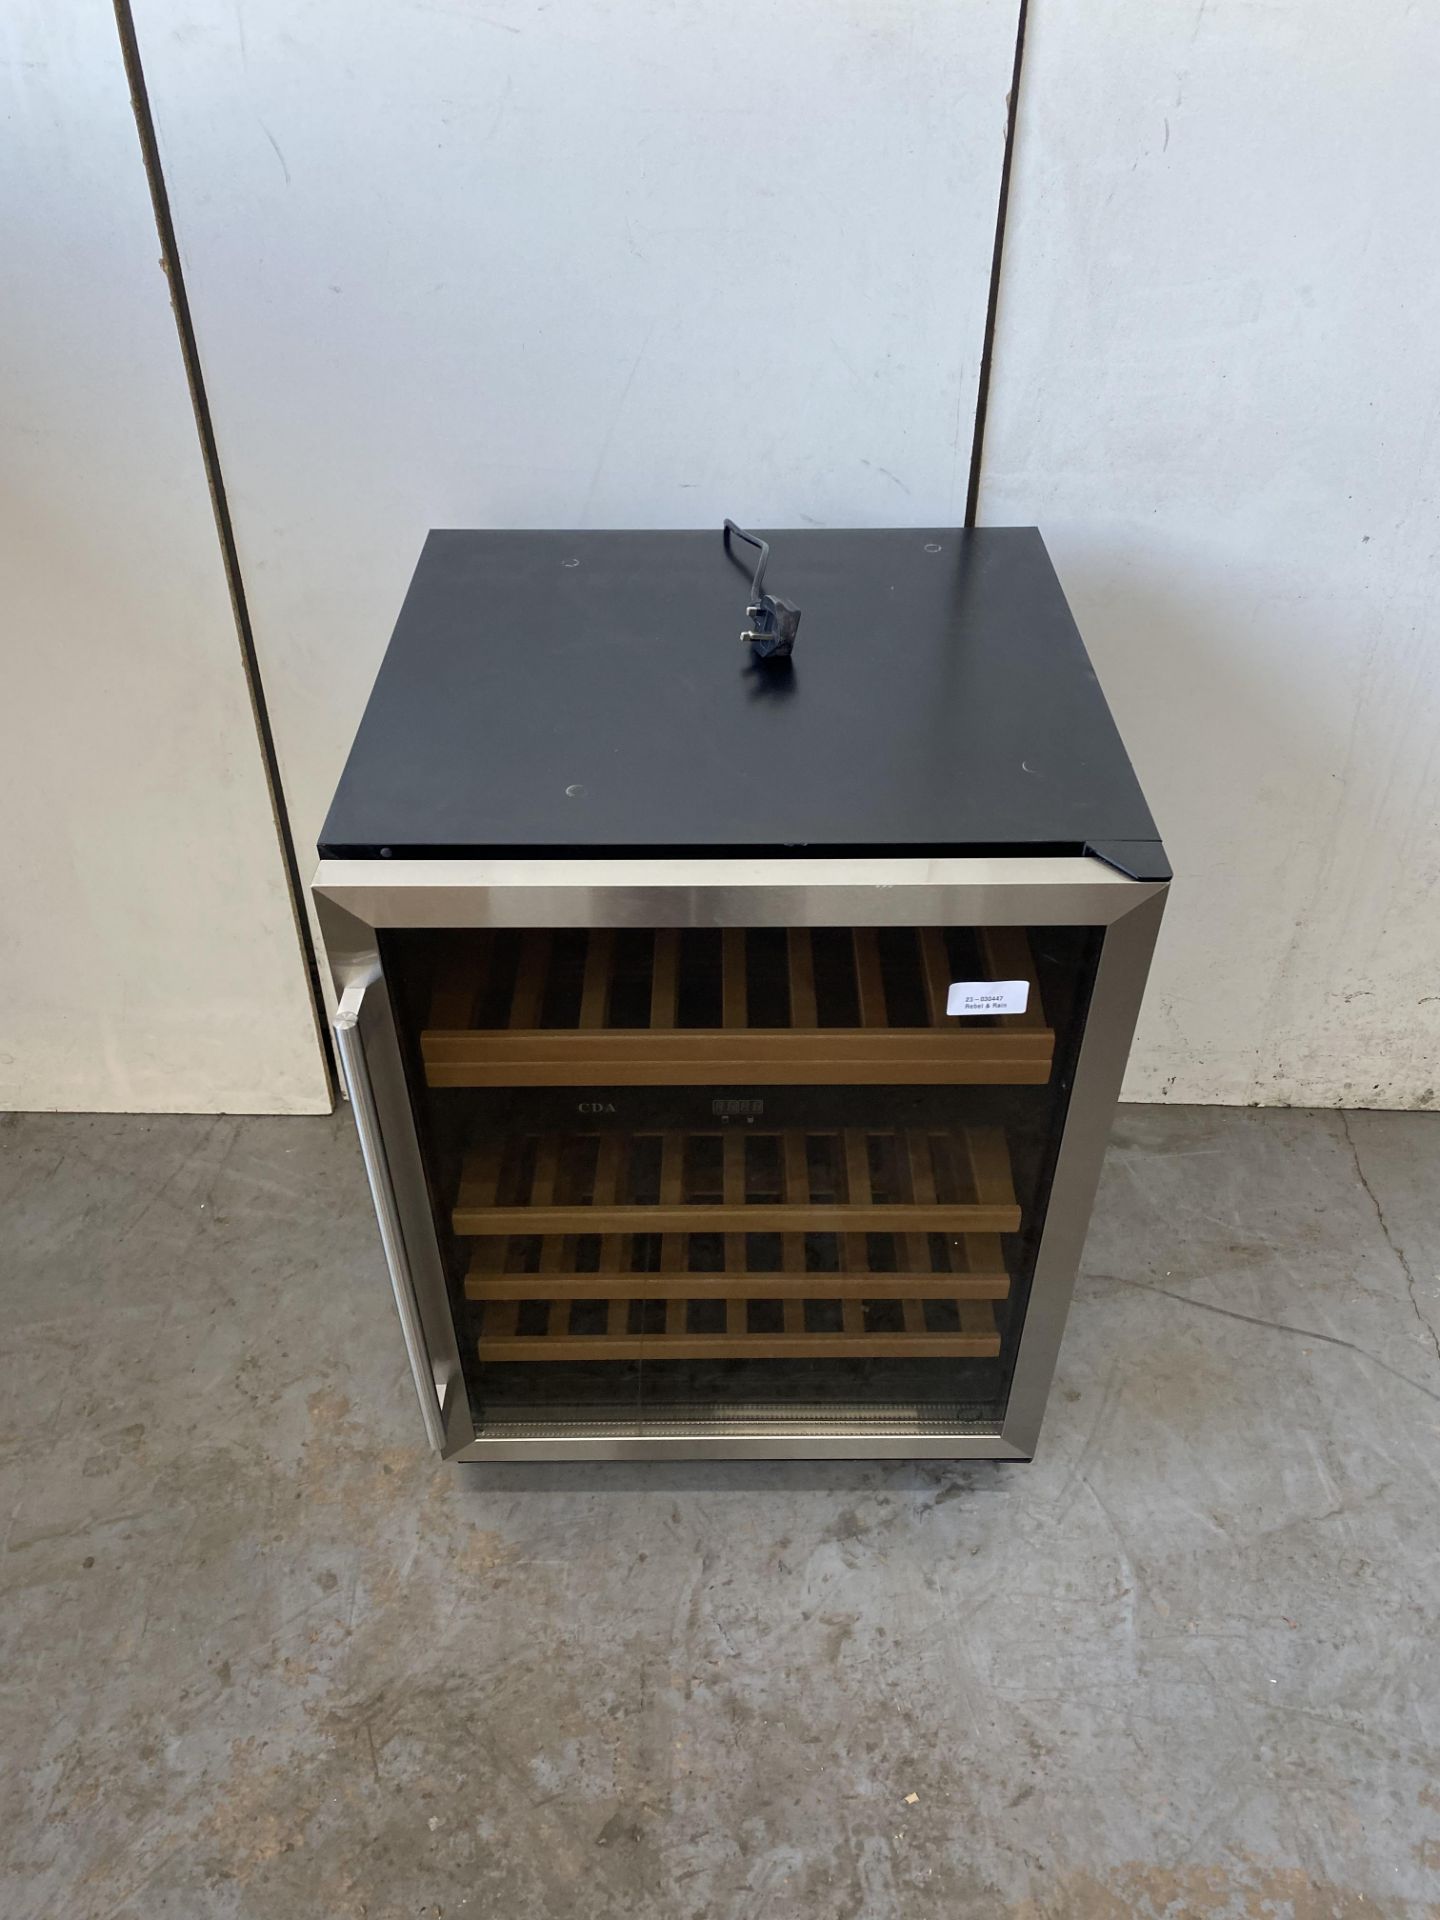 CDA FWC603SS Freestanding Under Counter Wine Cooler - Image 2 of 9